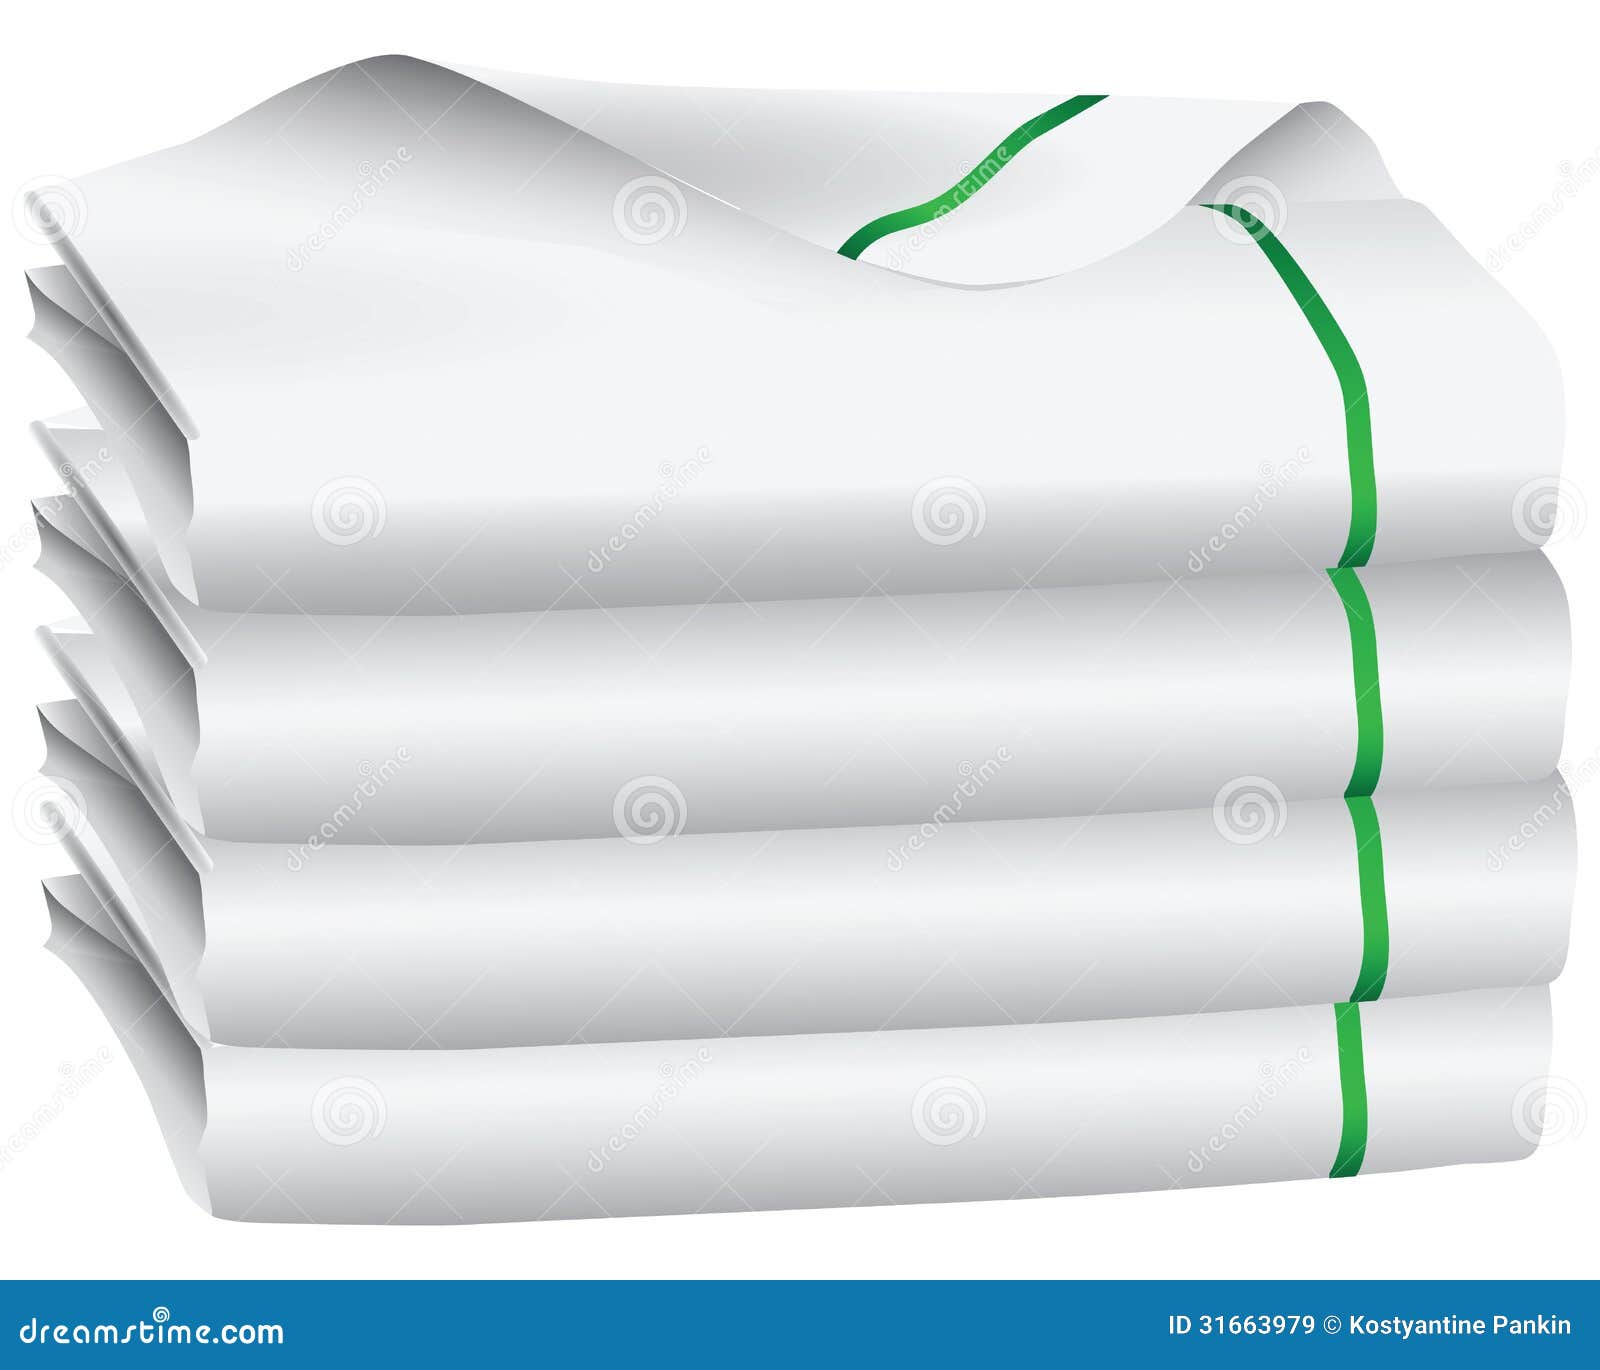 free clipart kitchen towels - photo #37